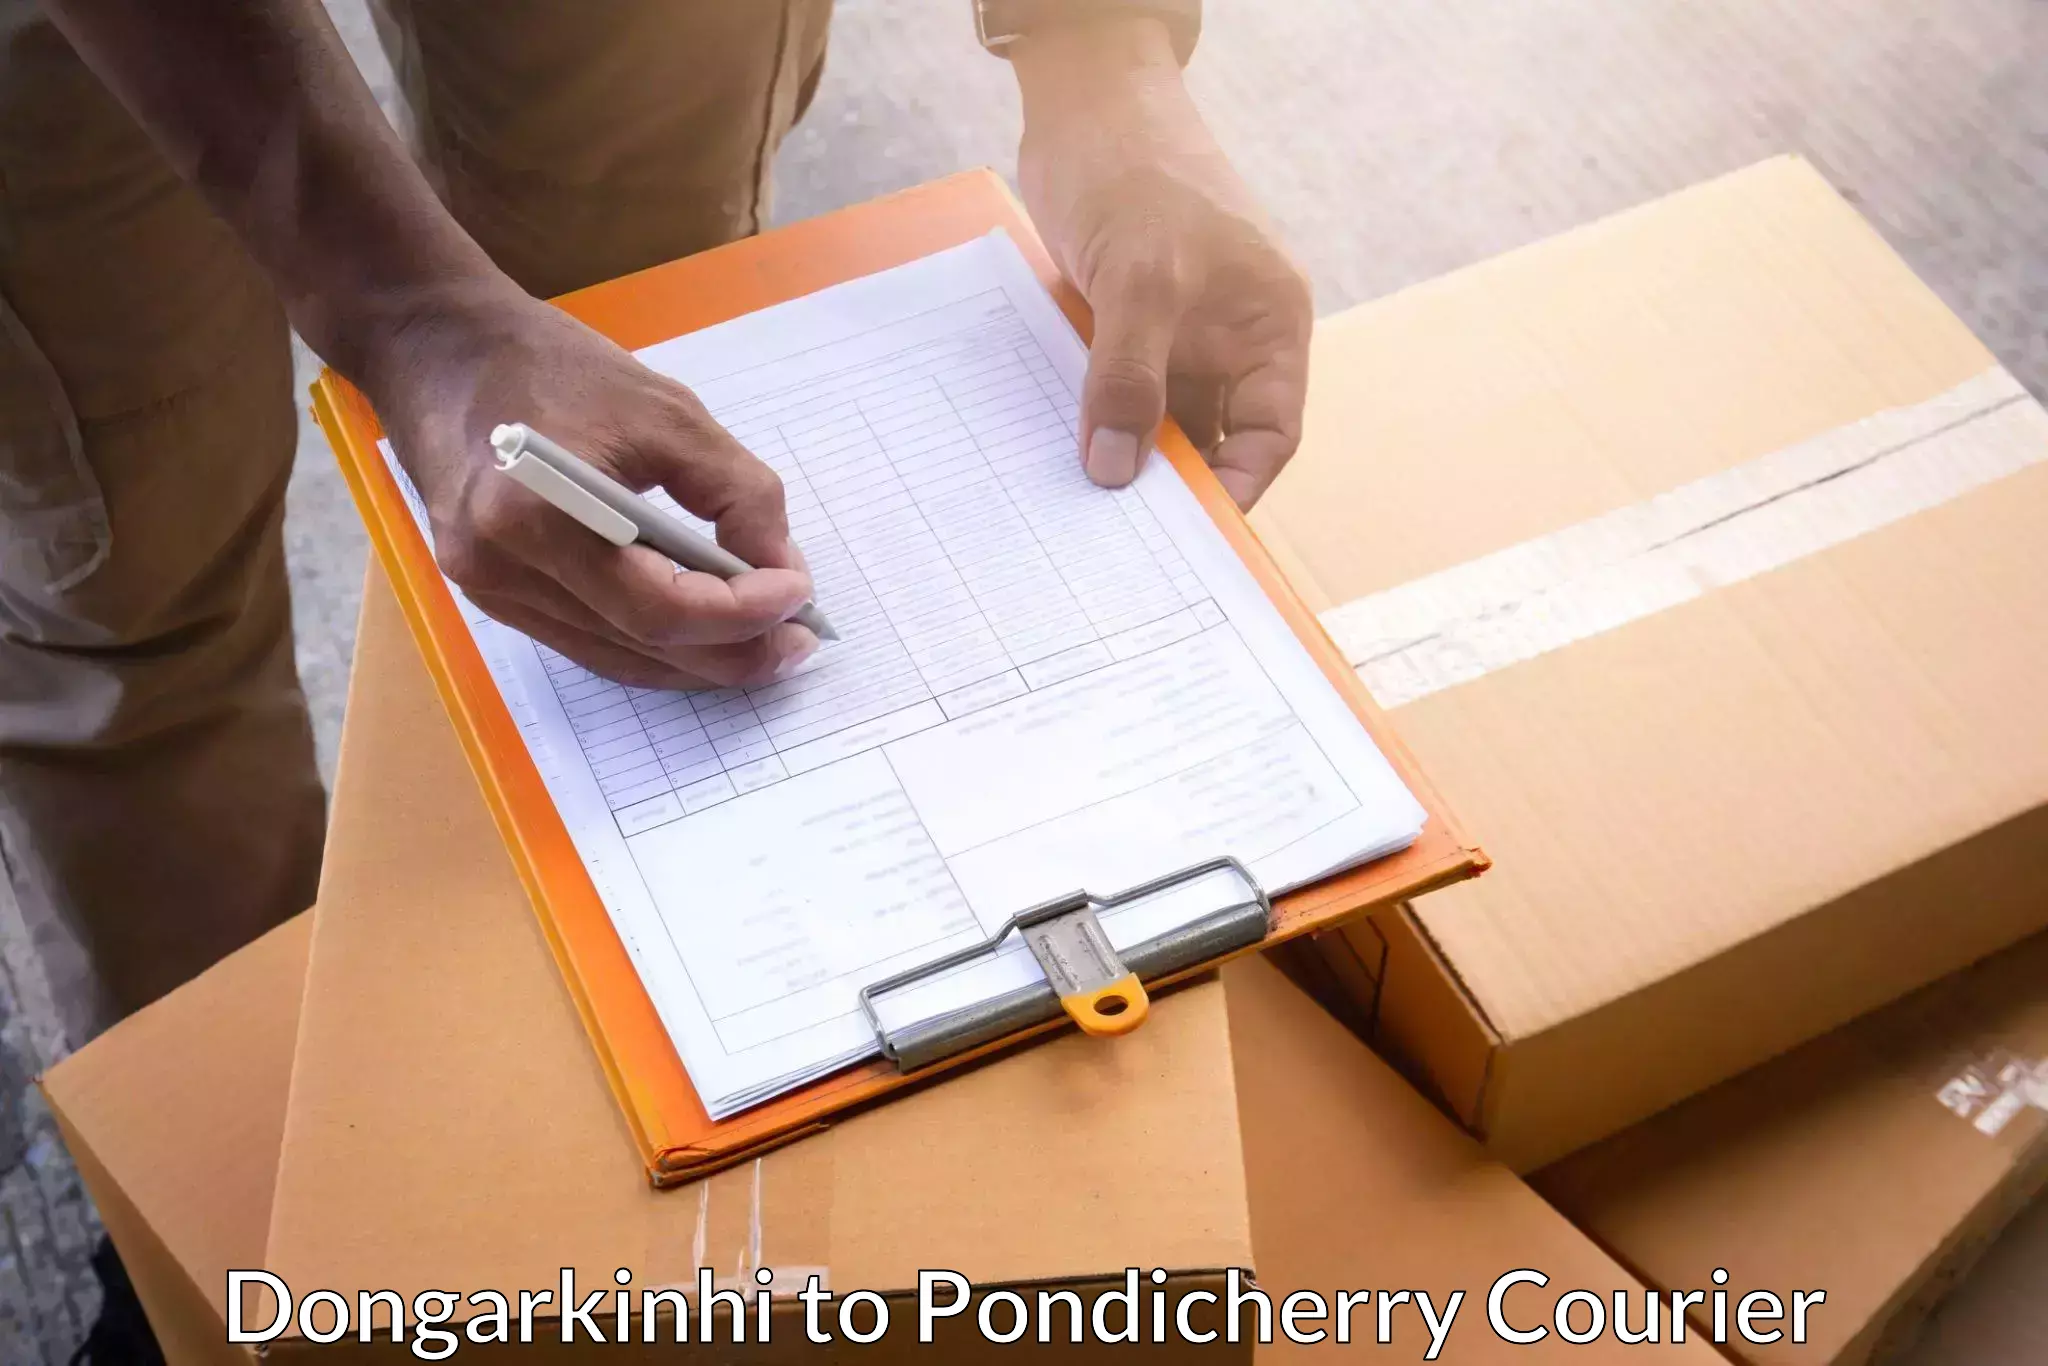 Global shipping solutions in Dongarkinhi to Pondicherry